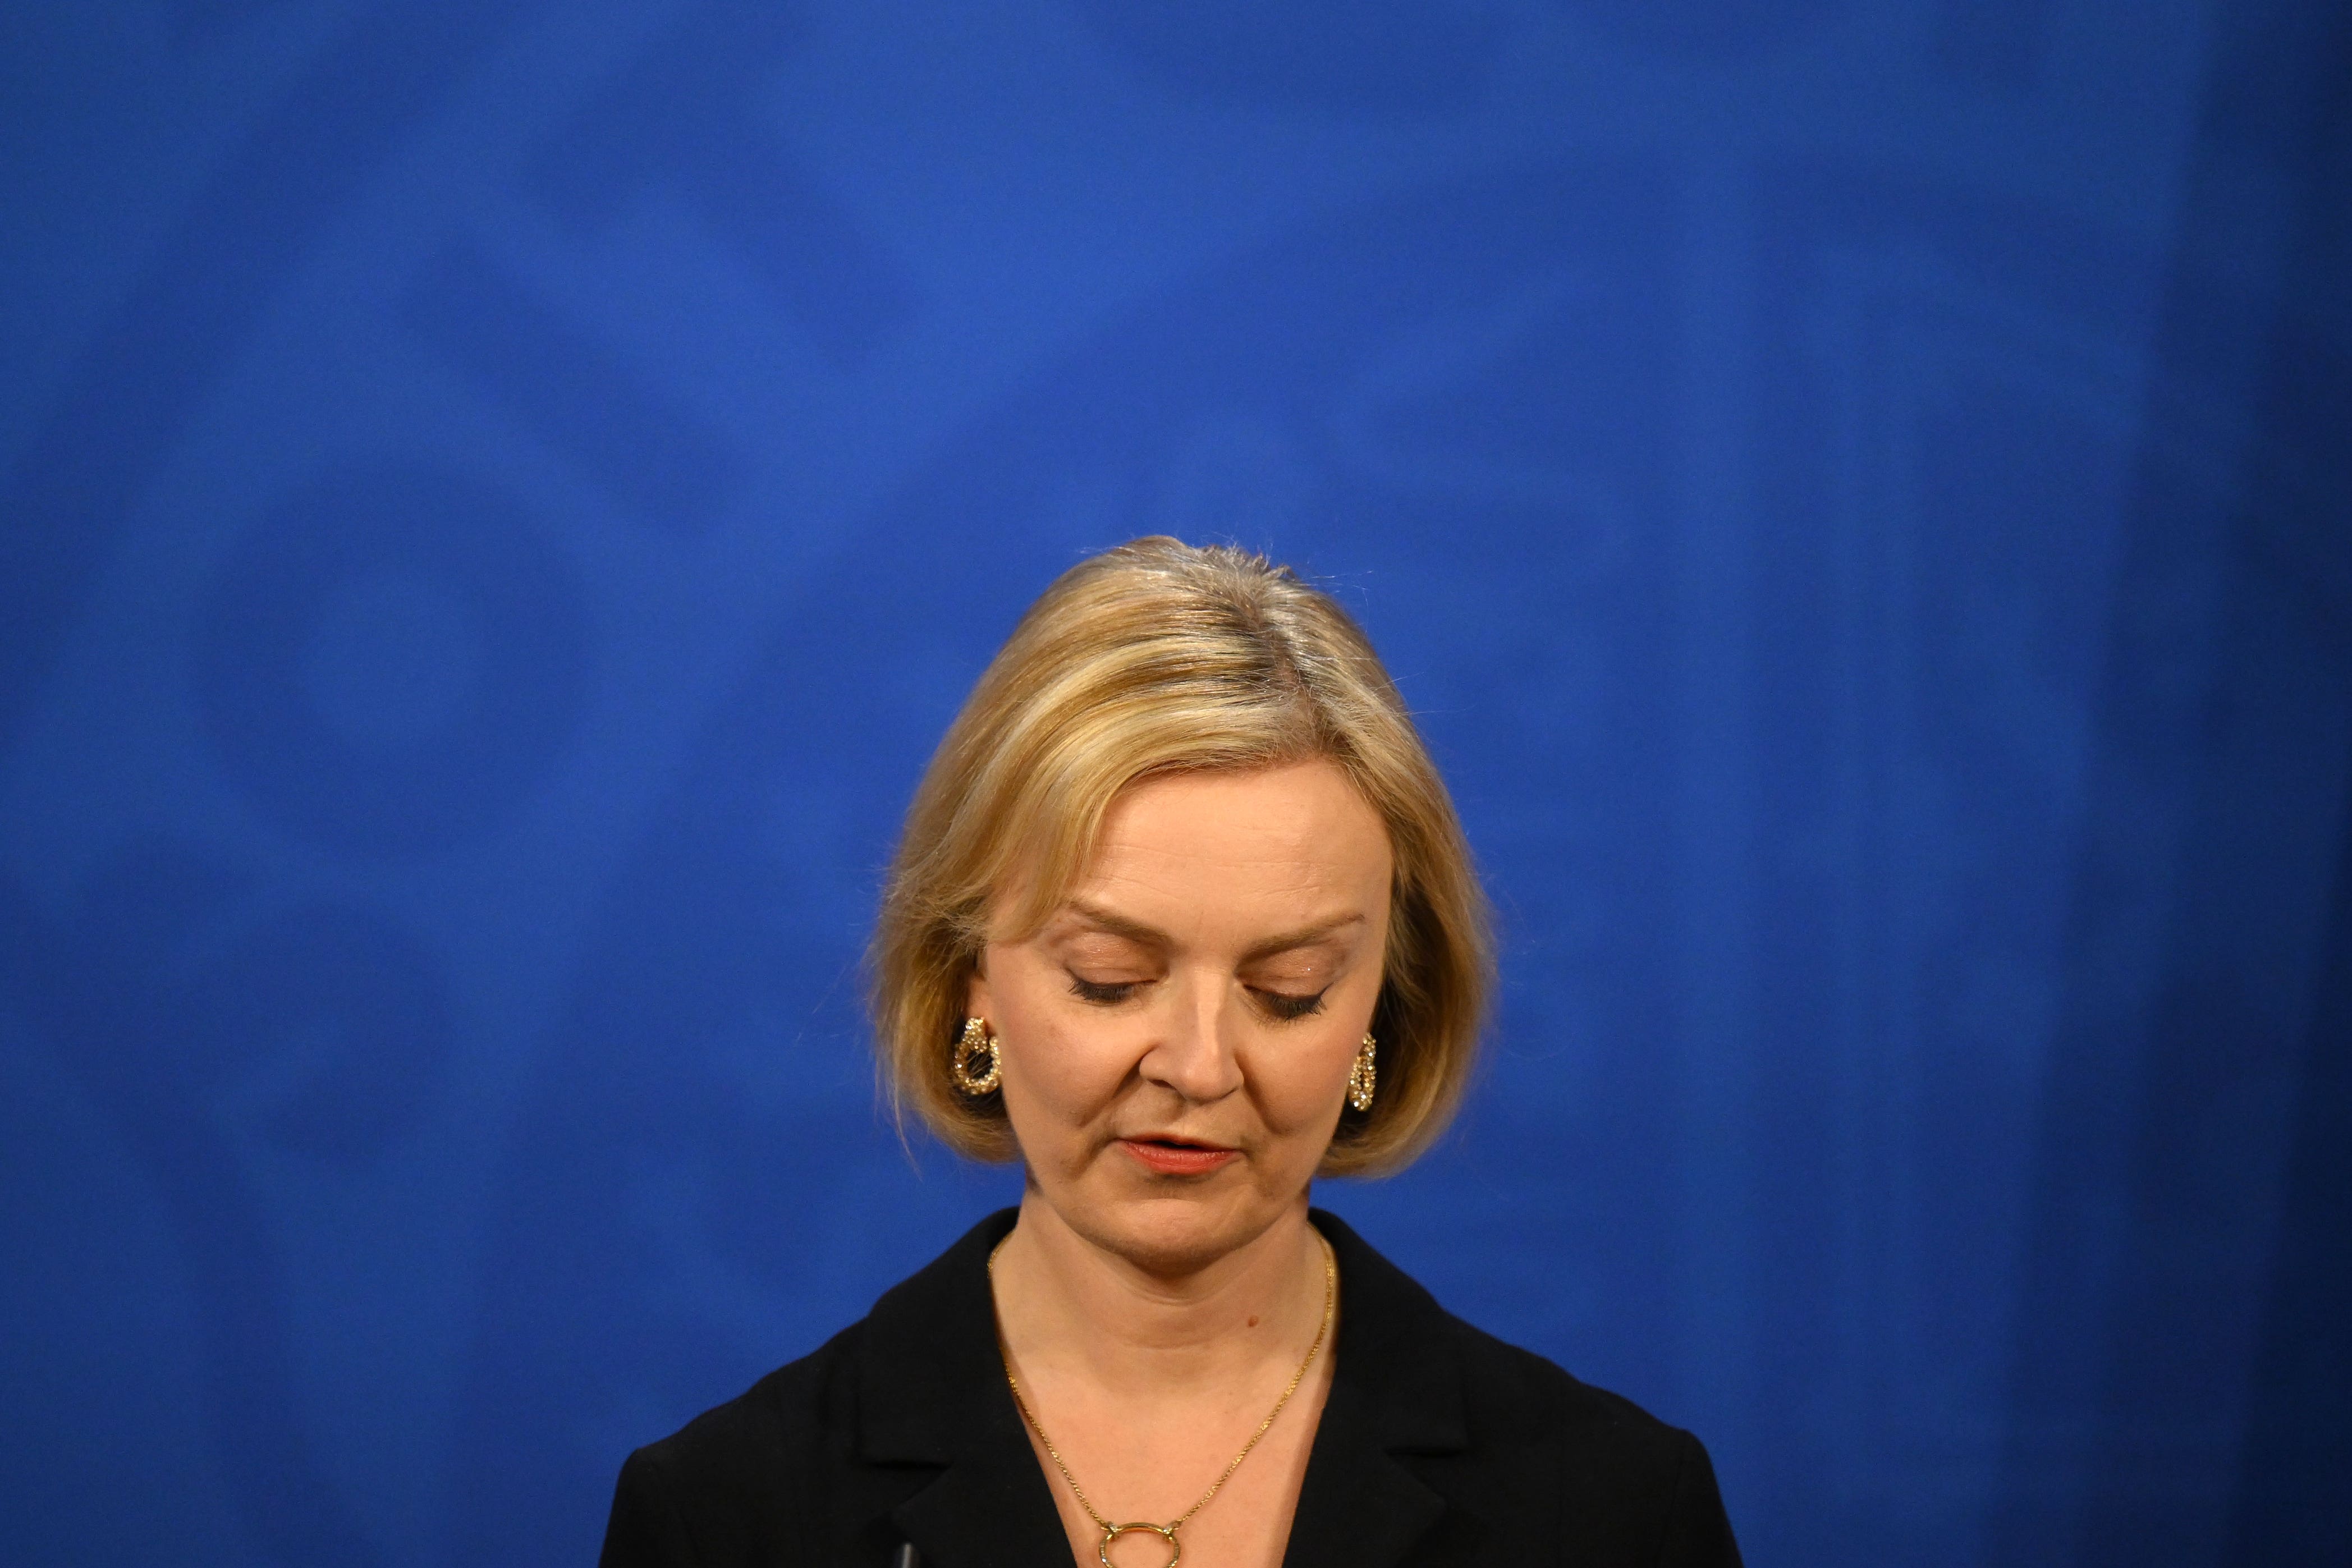 Prime Minister Liz Truss during a press conference in the briefing room at Downing Street (Daniel Leal/PA)